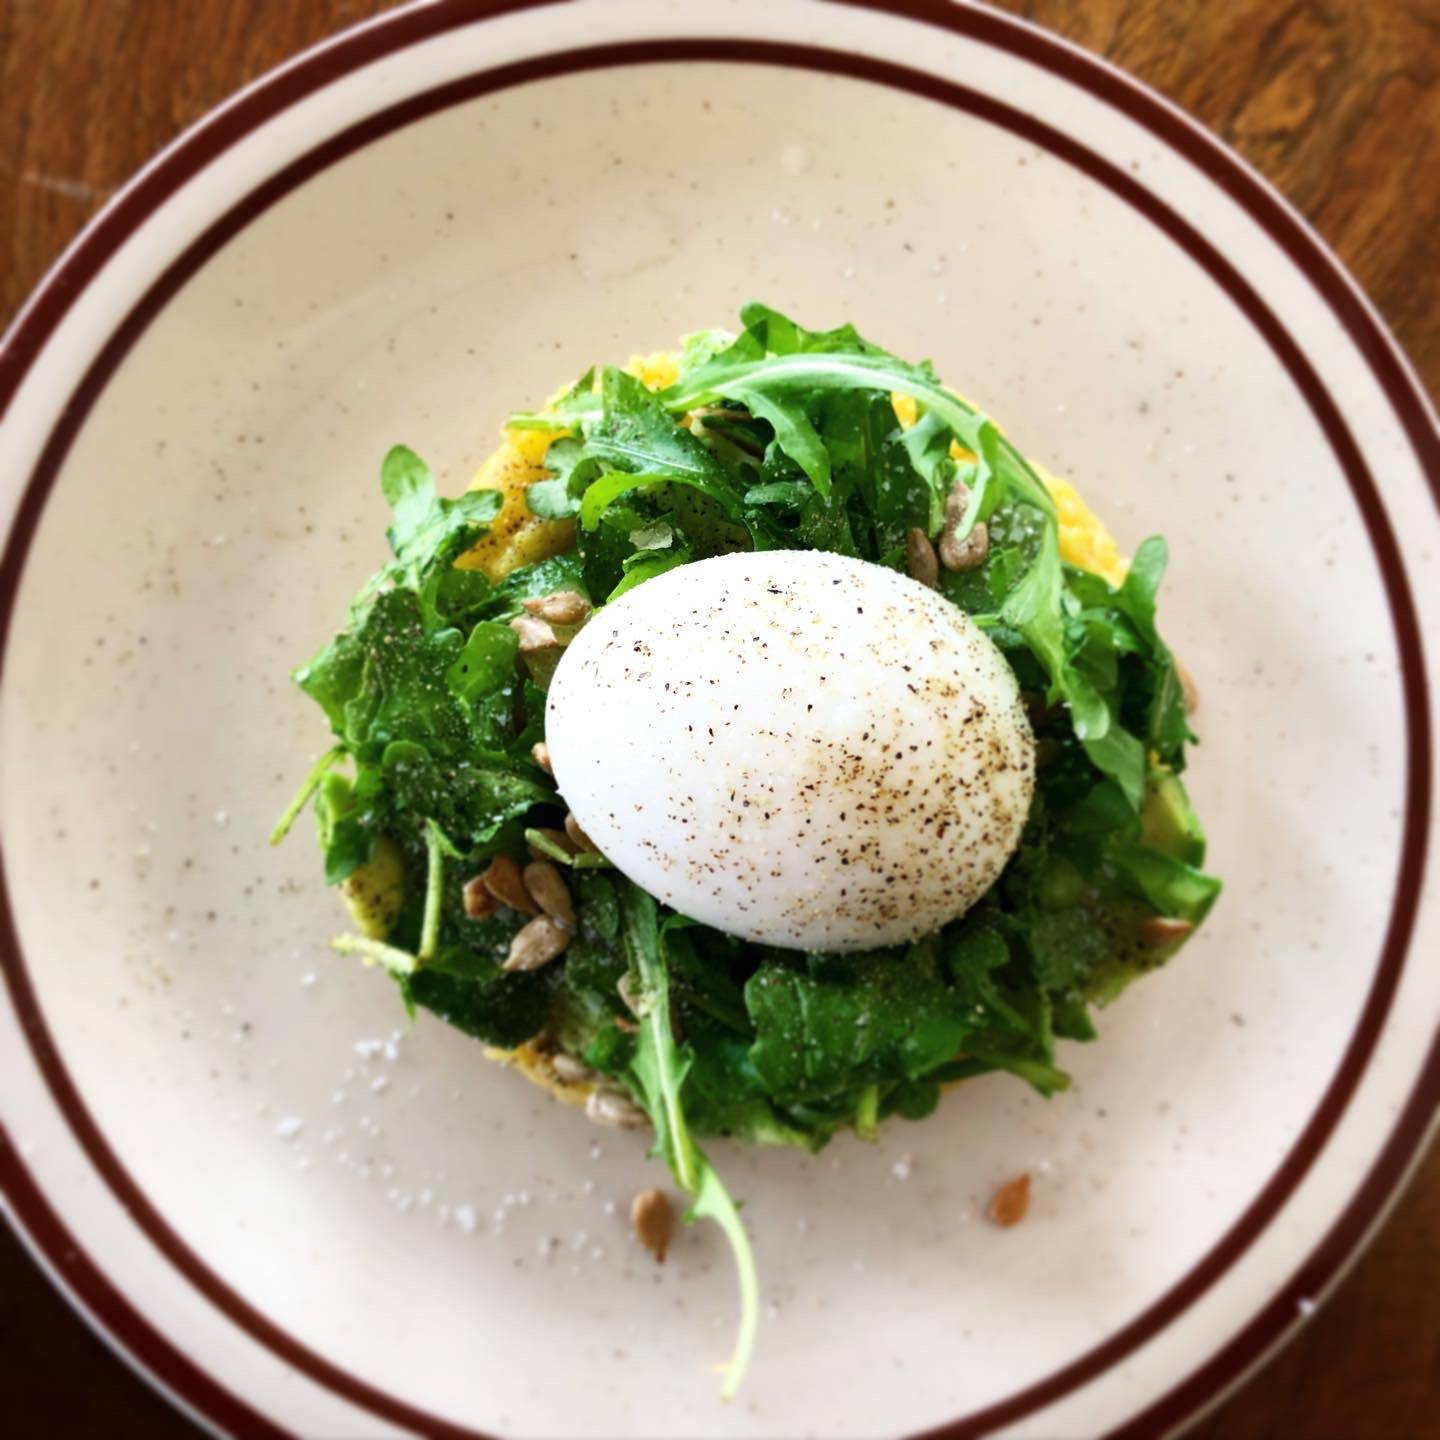 Poached egg sits atop a bed of greens, seeds, avocado, and grits. Photo by Alyssa Buckley.